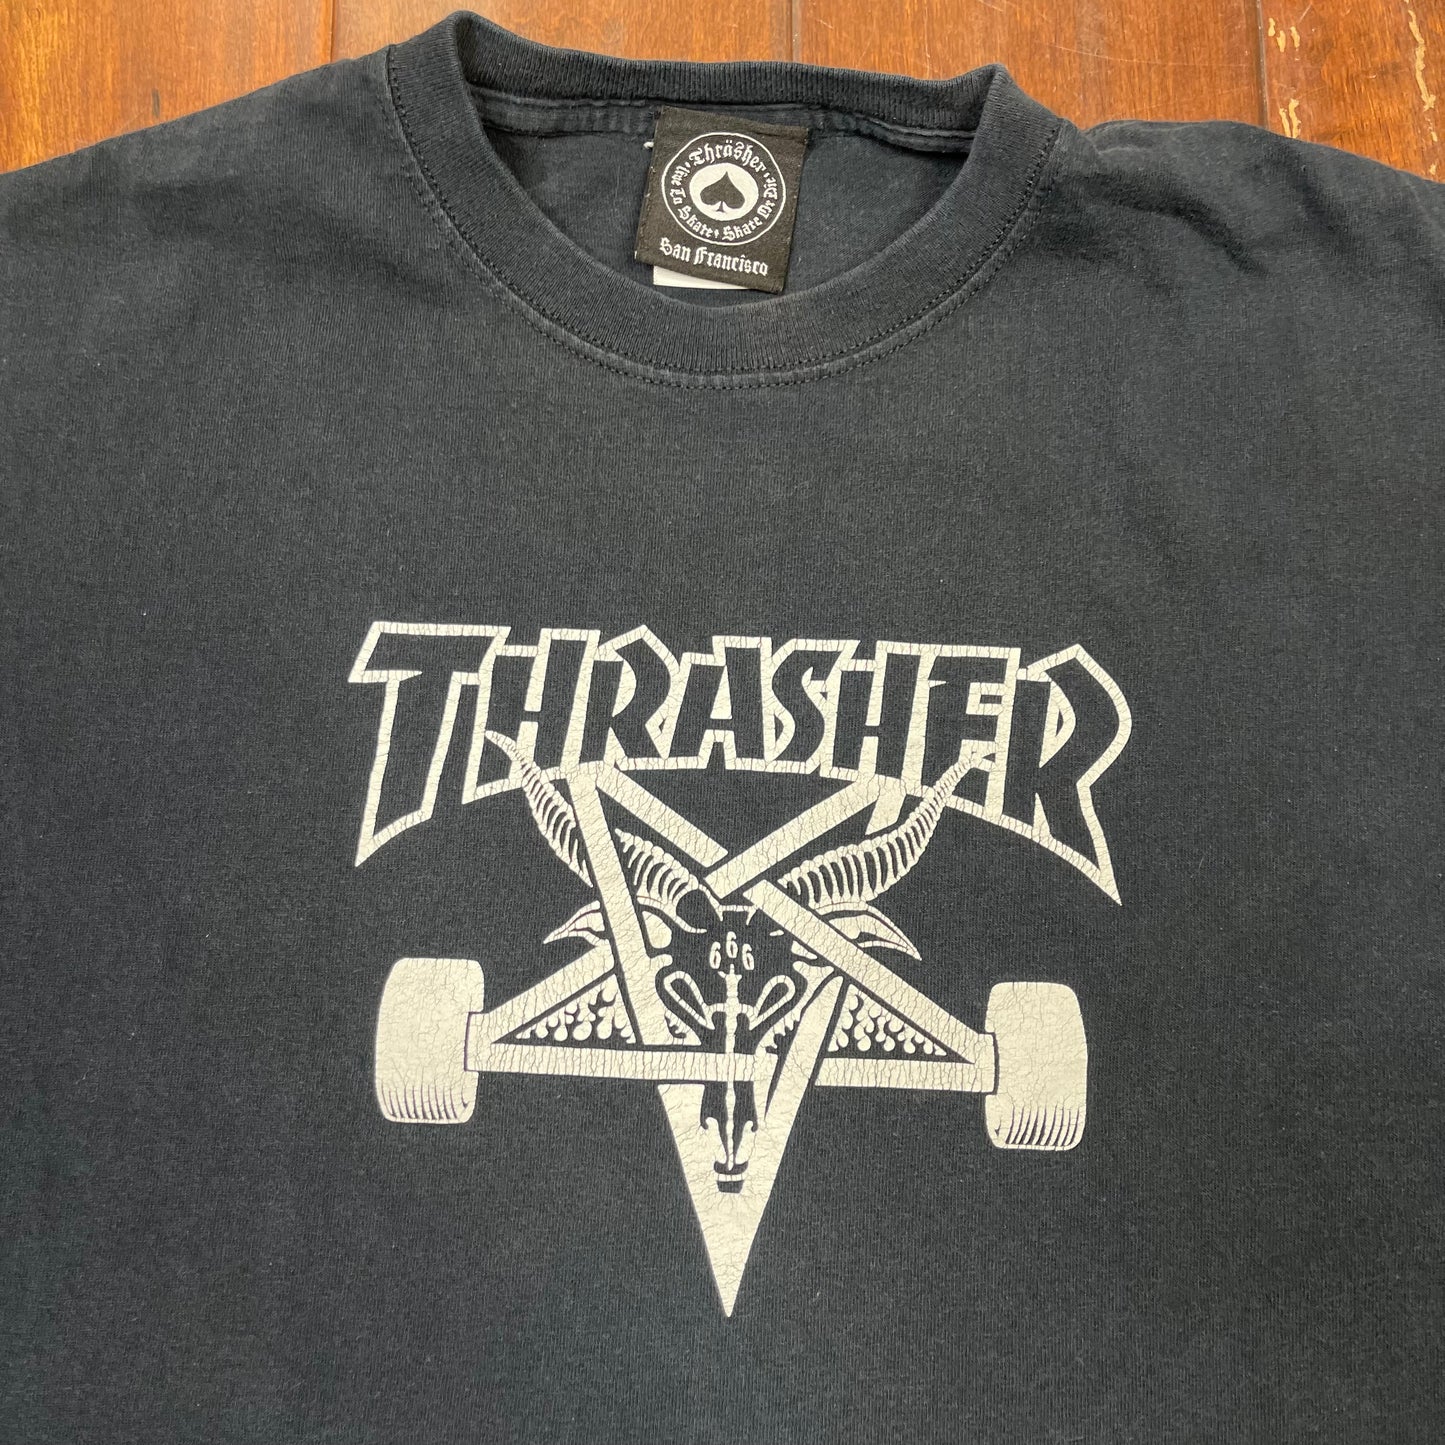 THRIFTED “TRASHER” T-SHIRT